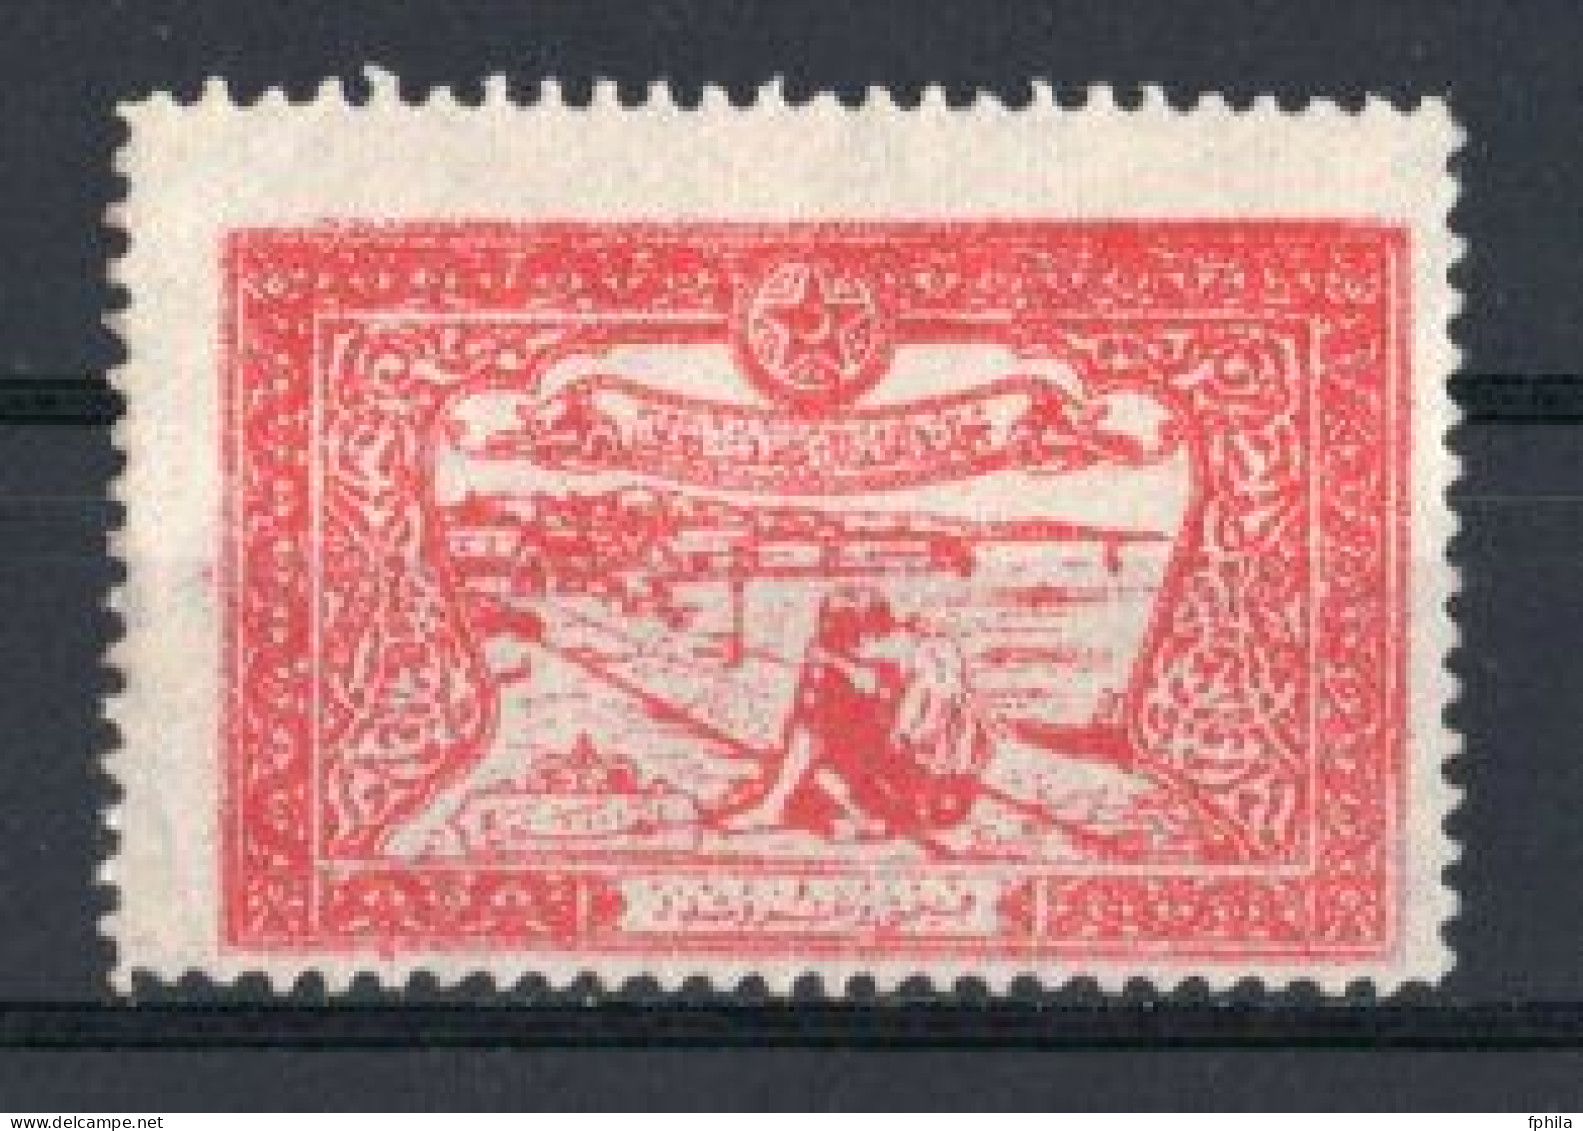 1923 TURKEY STAMP IN AID OF THE TURKISH SOCIETY FOR THE PROTECTION OF CHILDREN MH * - Charity Stamps